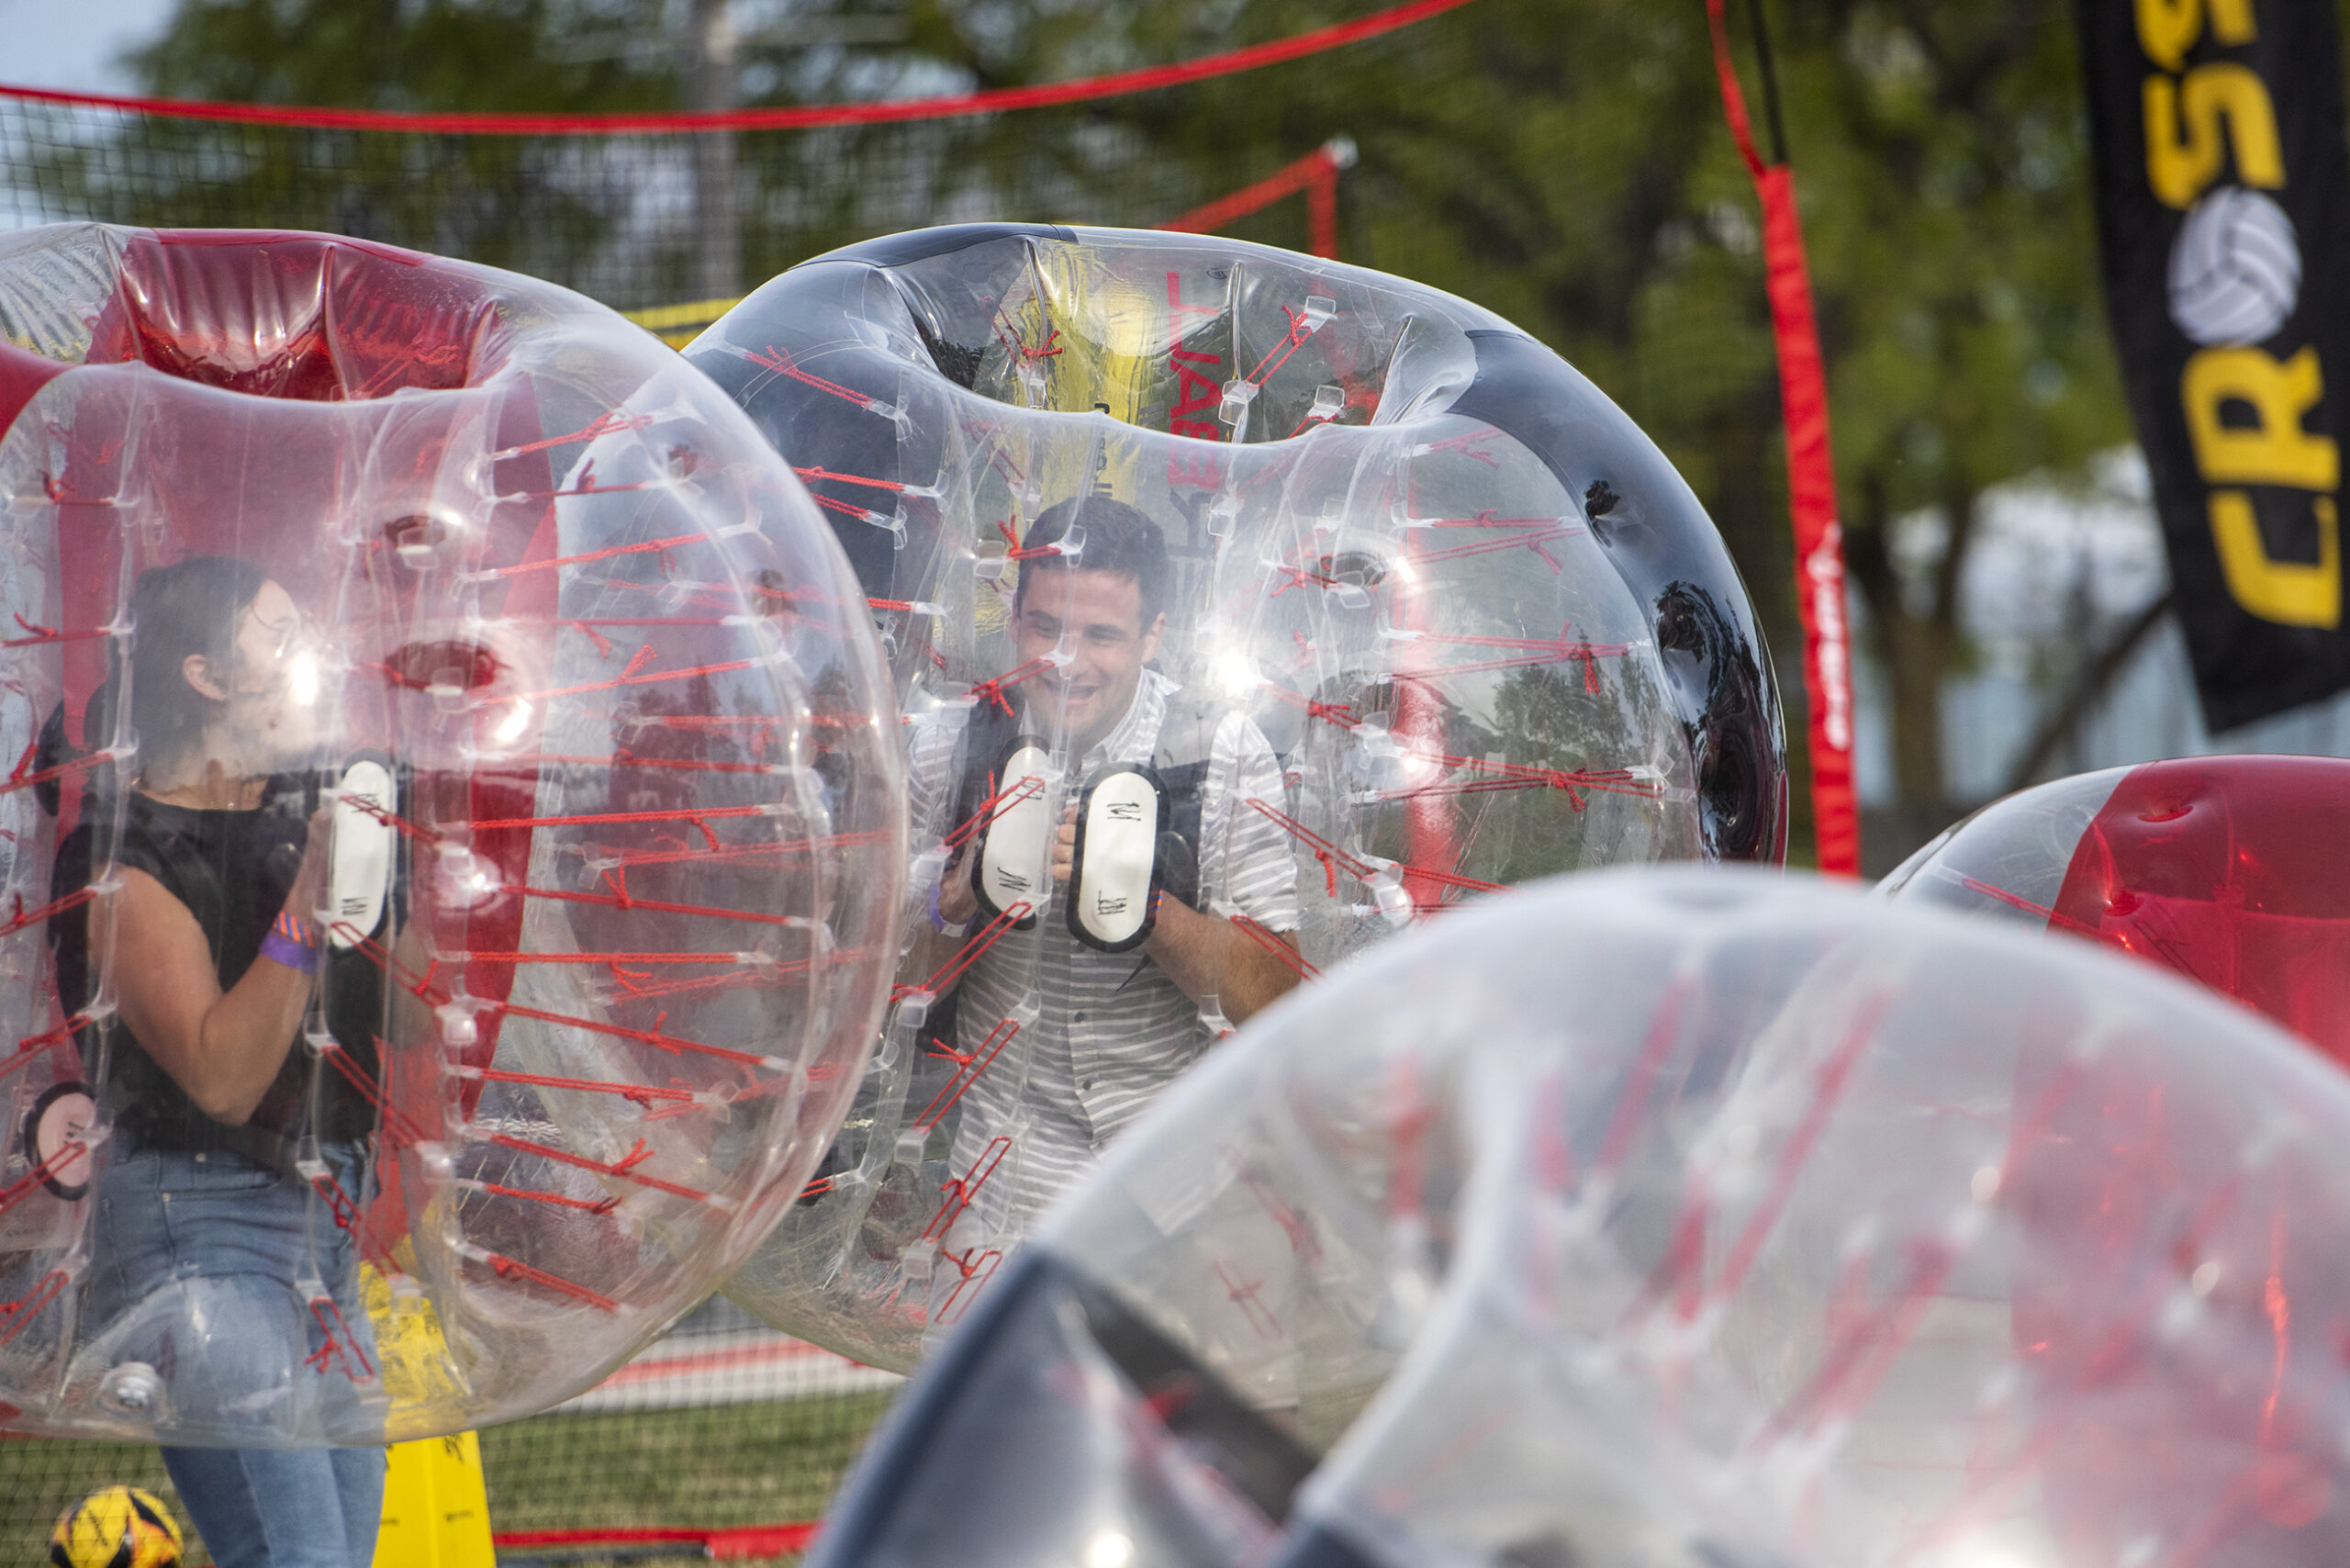 Attendees play a game inside of large inflatable balls.